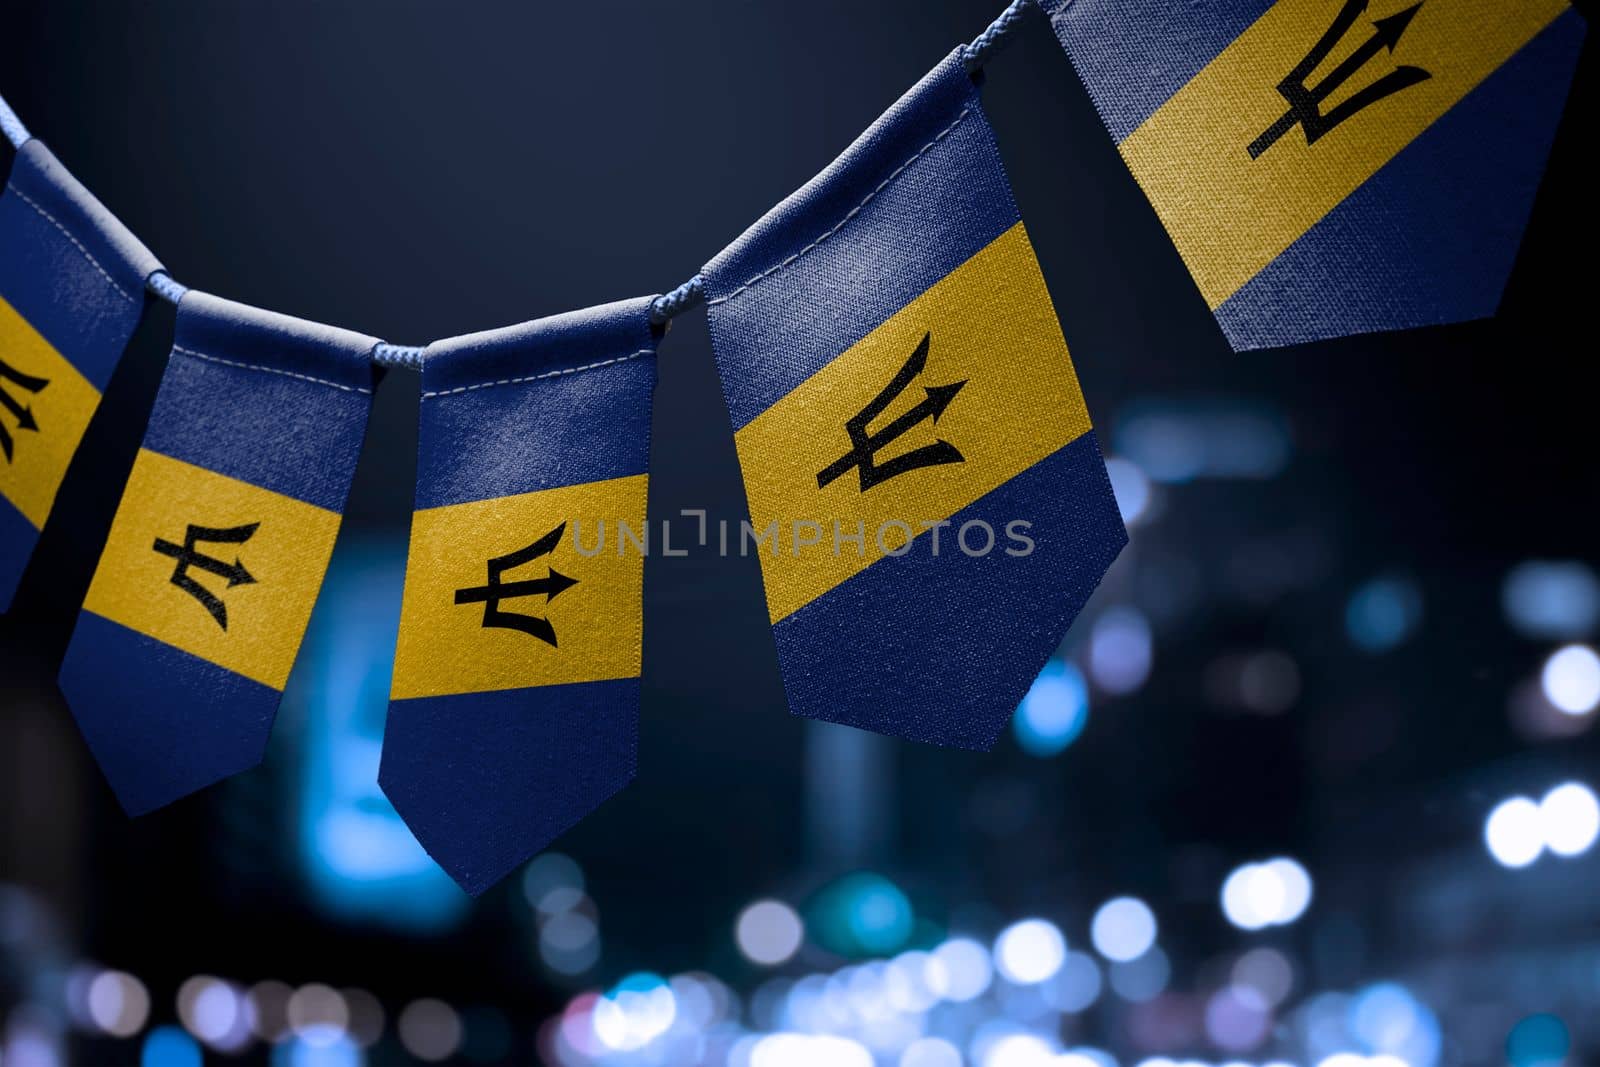 A garland of Barbados national flags on an abstract blurred background.